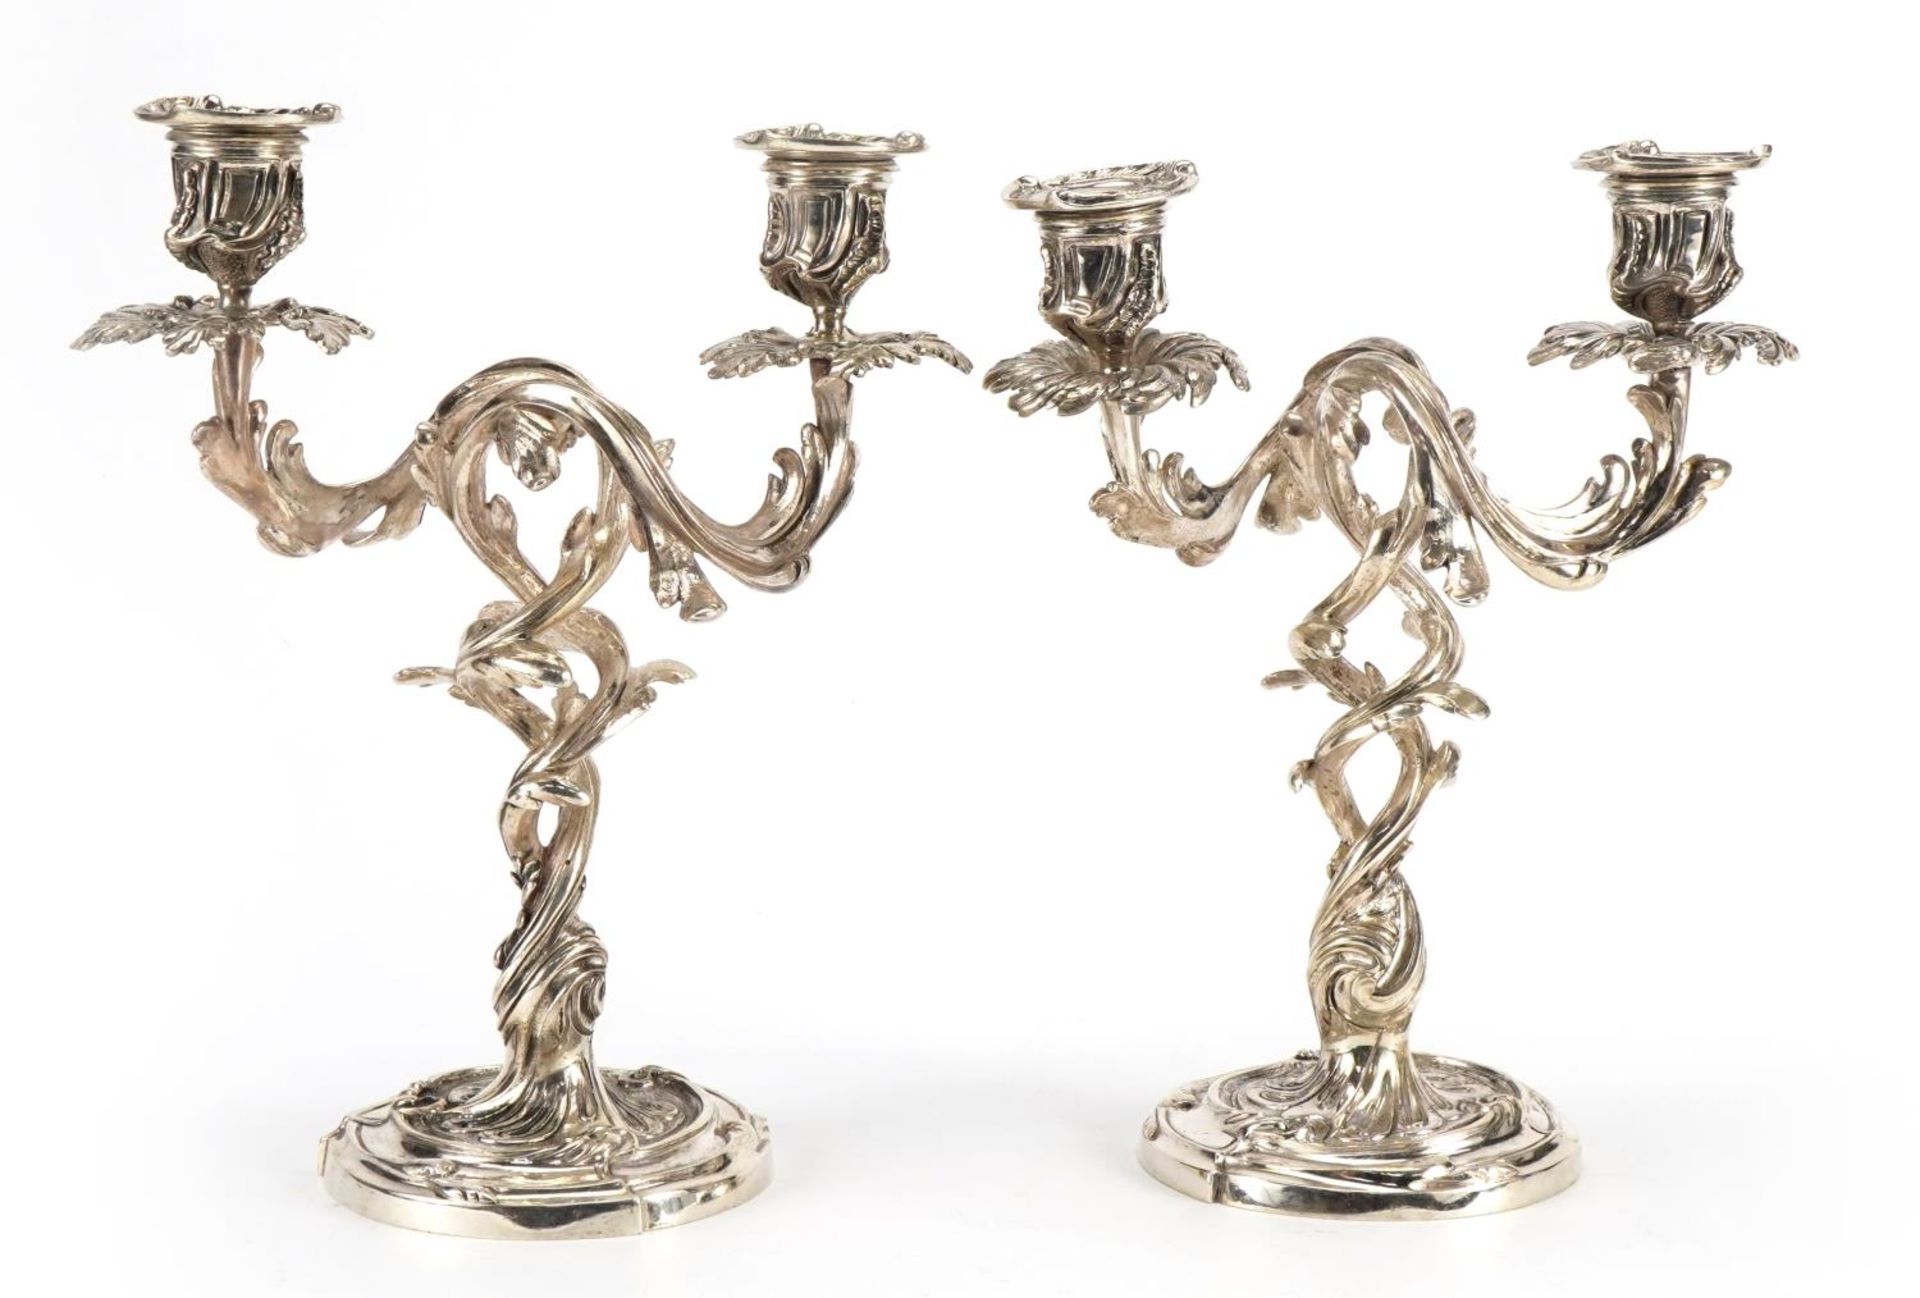 Pair of Rococo style silvered acanthus design two branch candelabras, each 26cm high - Image 2 of 3